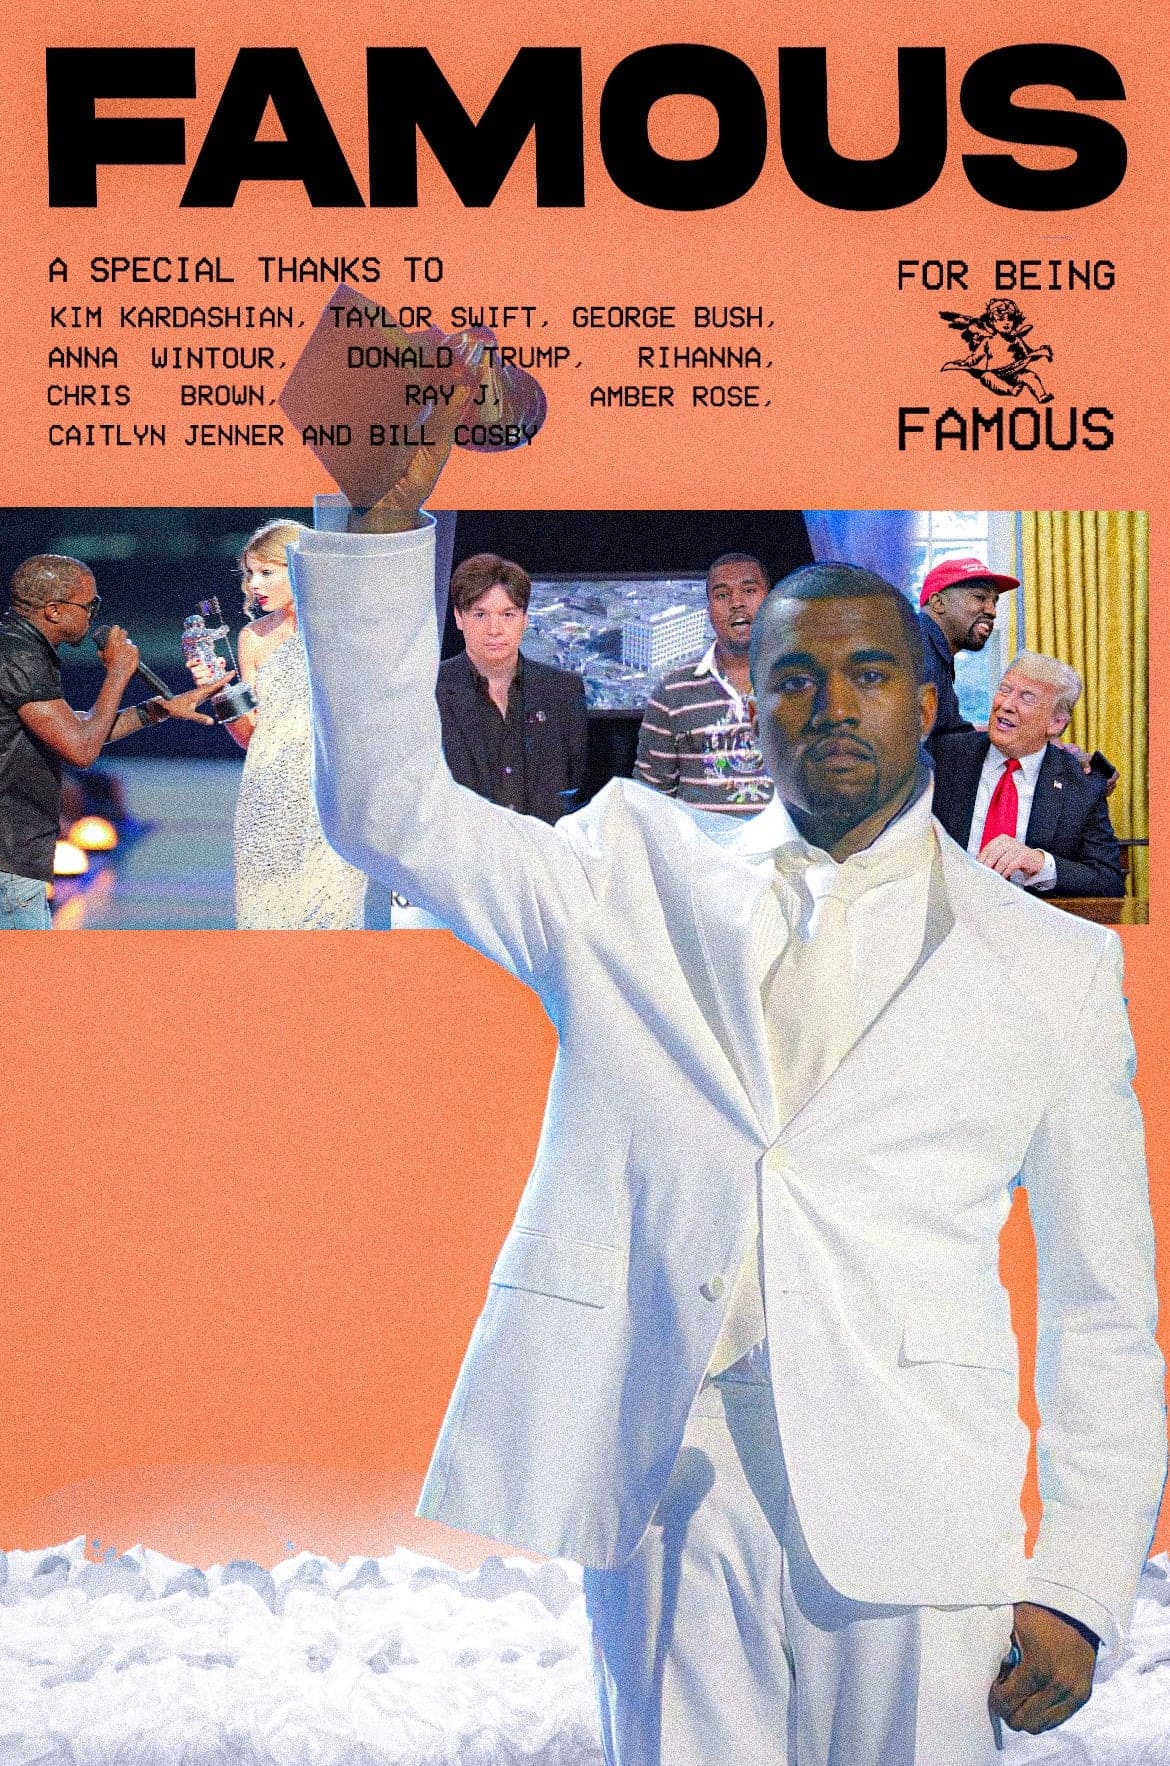 Kanye West 'For Being Famous' Poster - Posters Plug